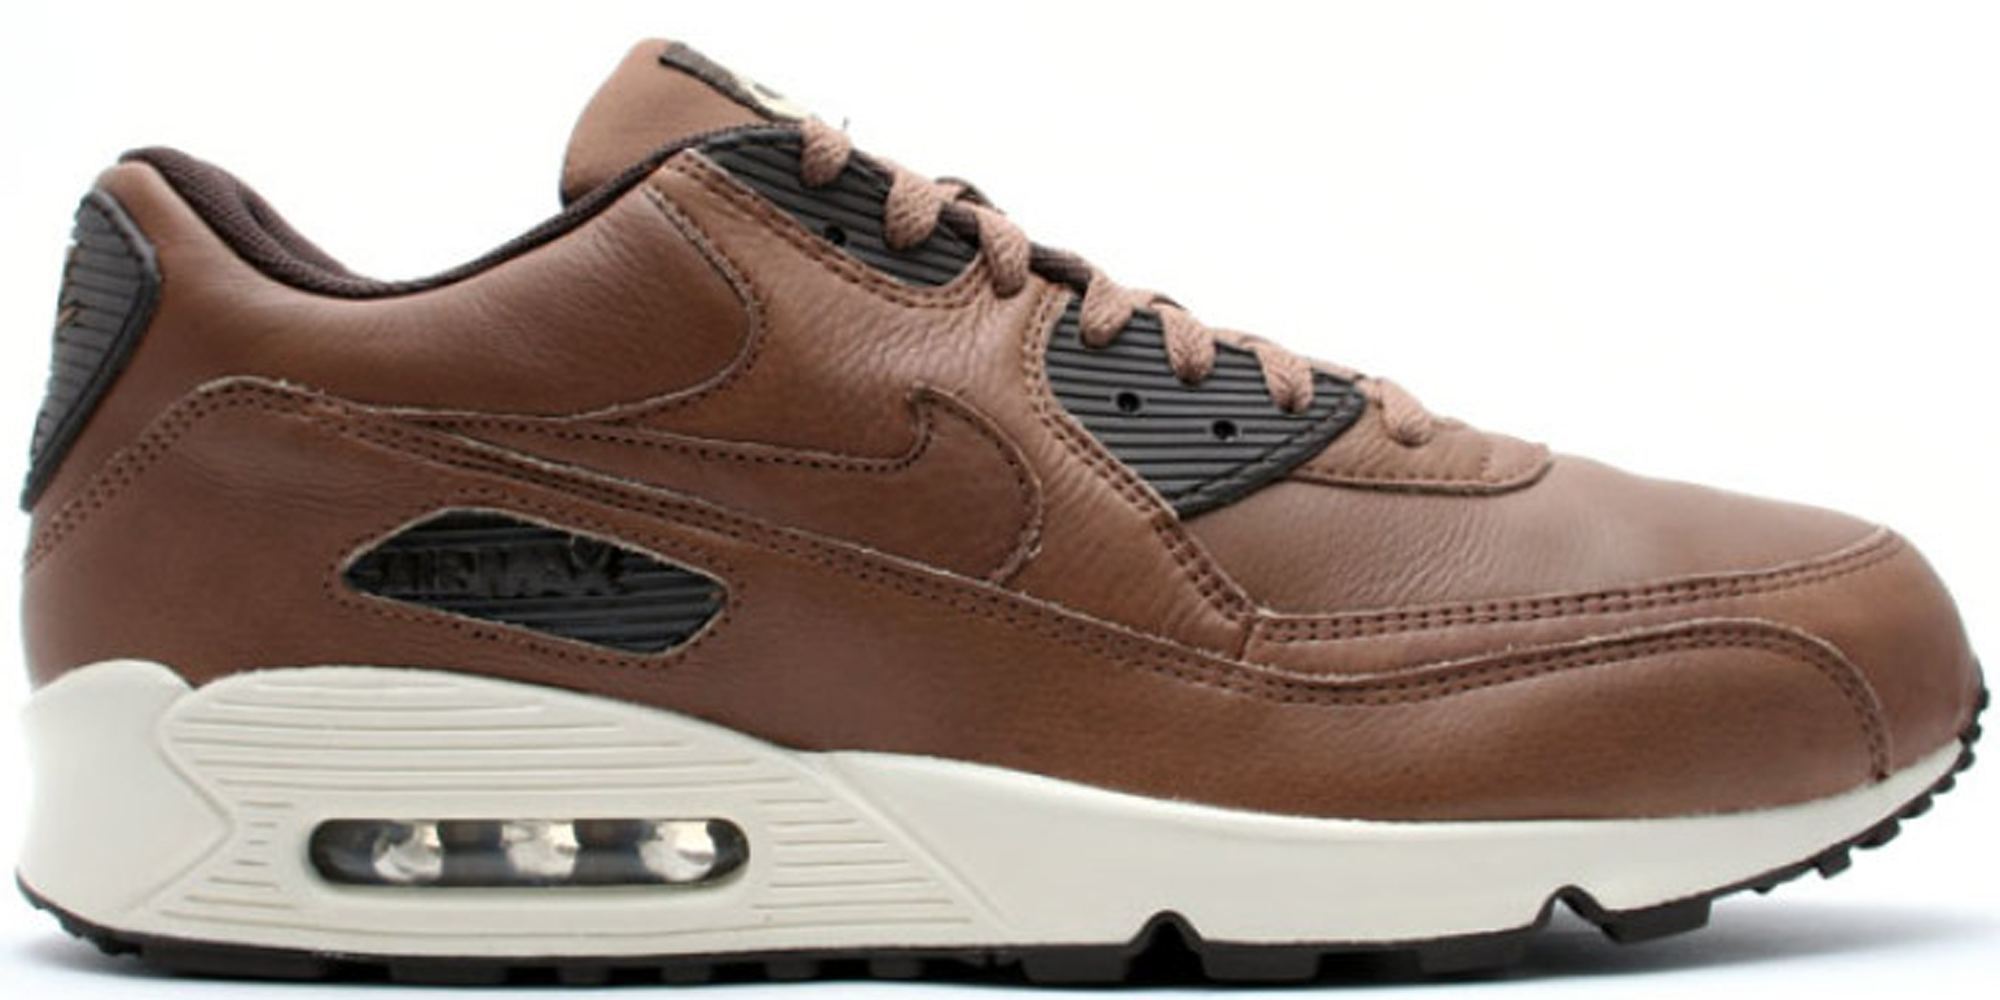 nike air max brown leather